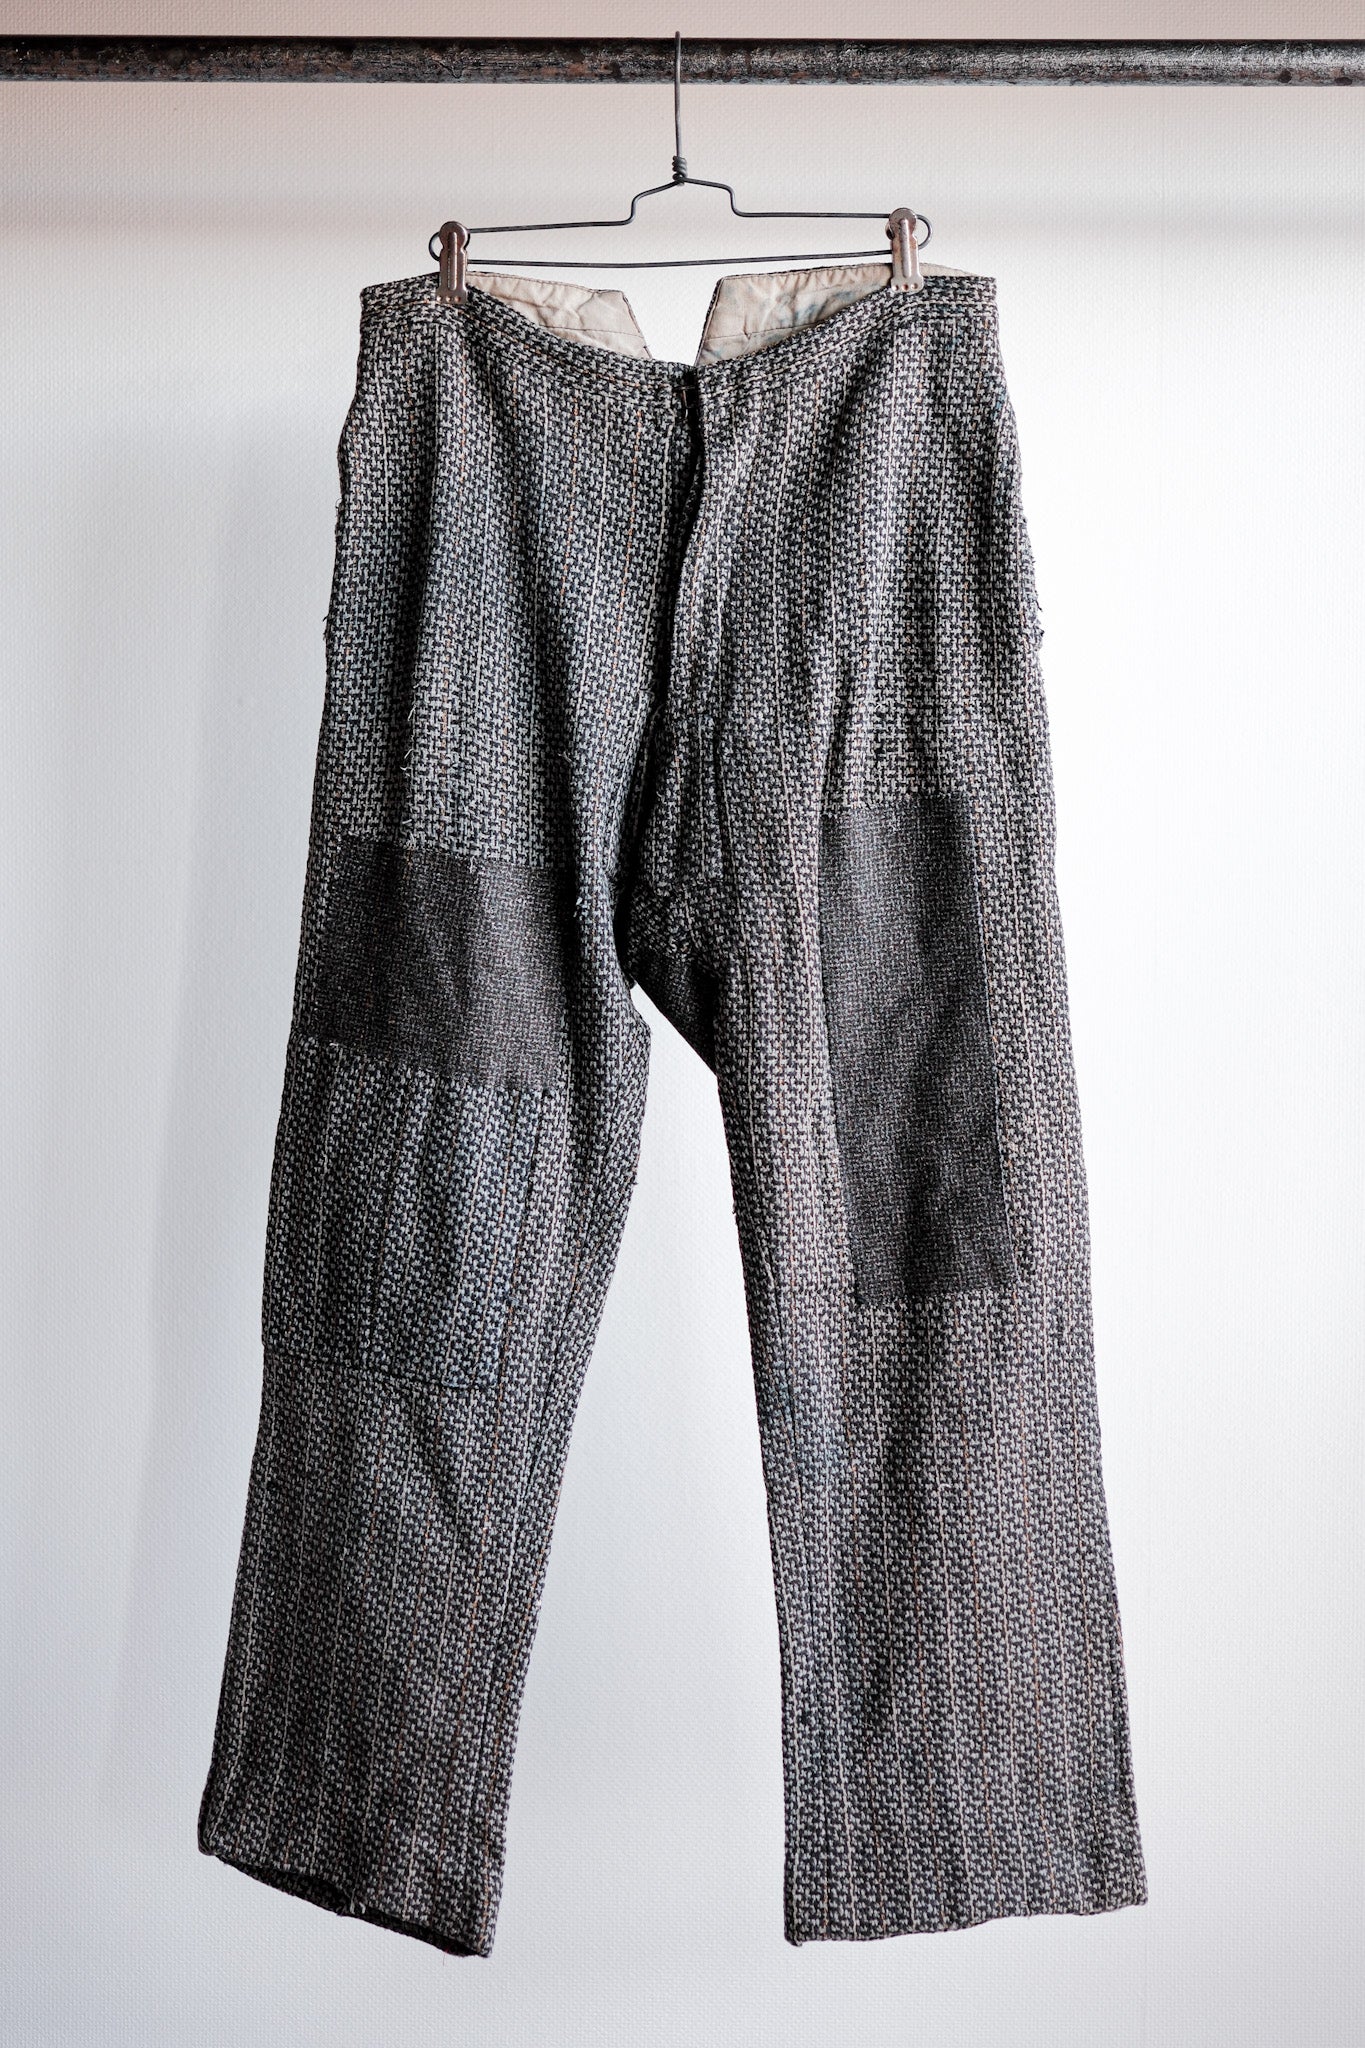 20's] French Vintage Homemade Work Work Pants 